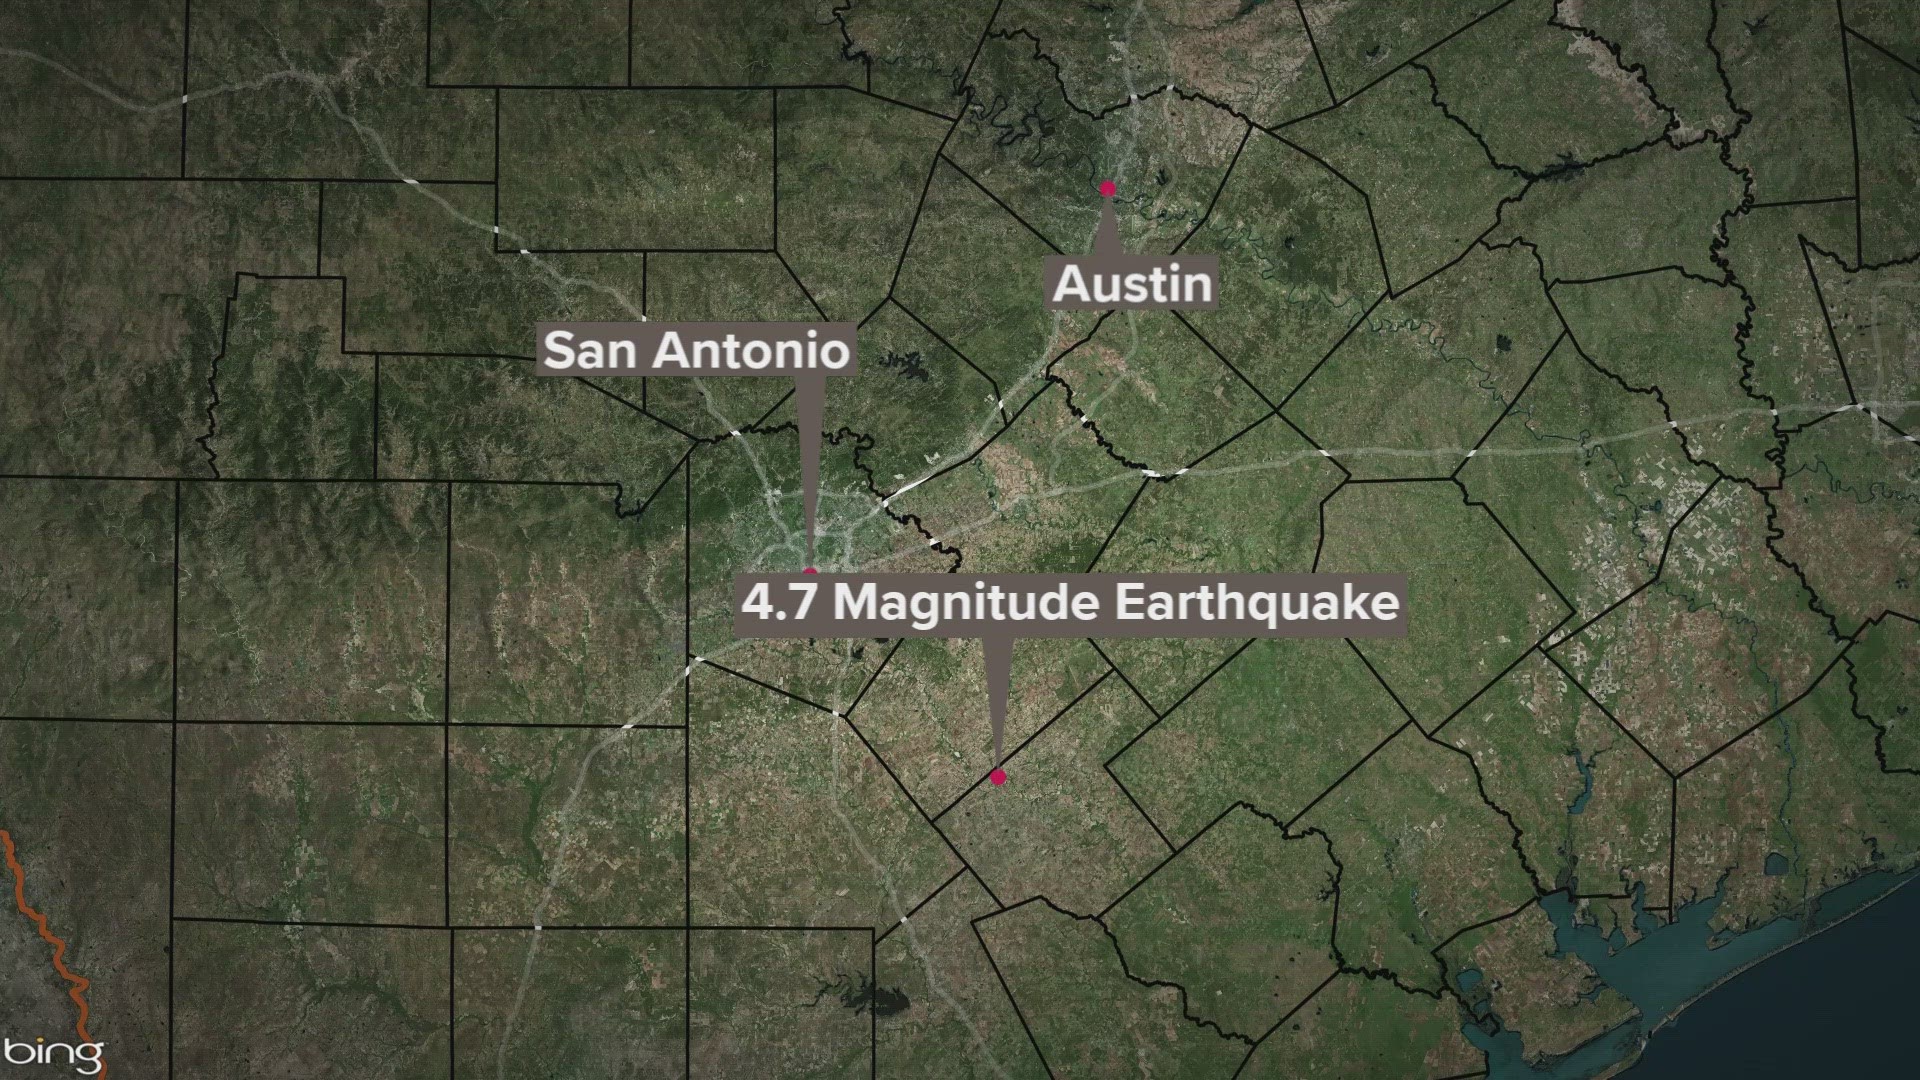 More than a dozen earthquakes have been recorded in South Texas within the last week, with its two strongest yet felt in Central Texas.